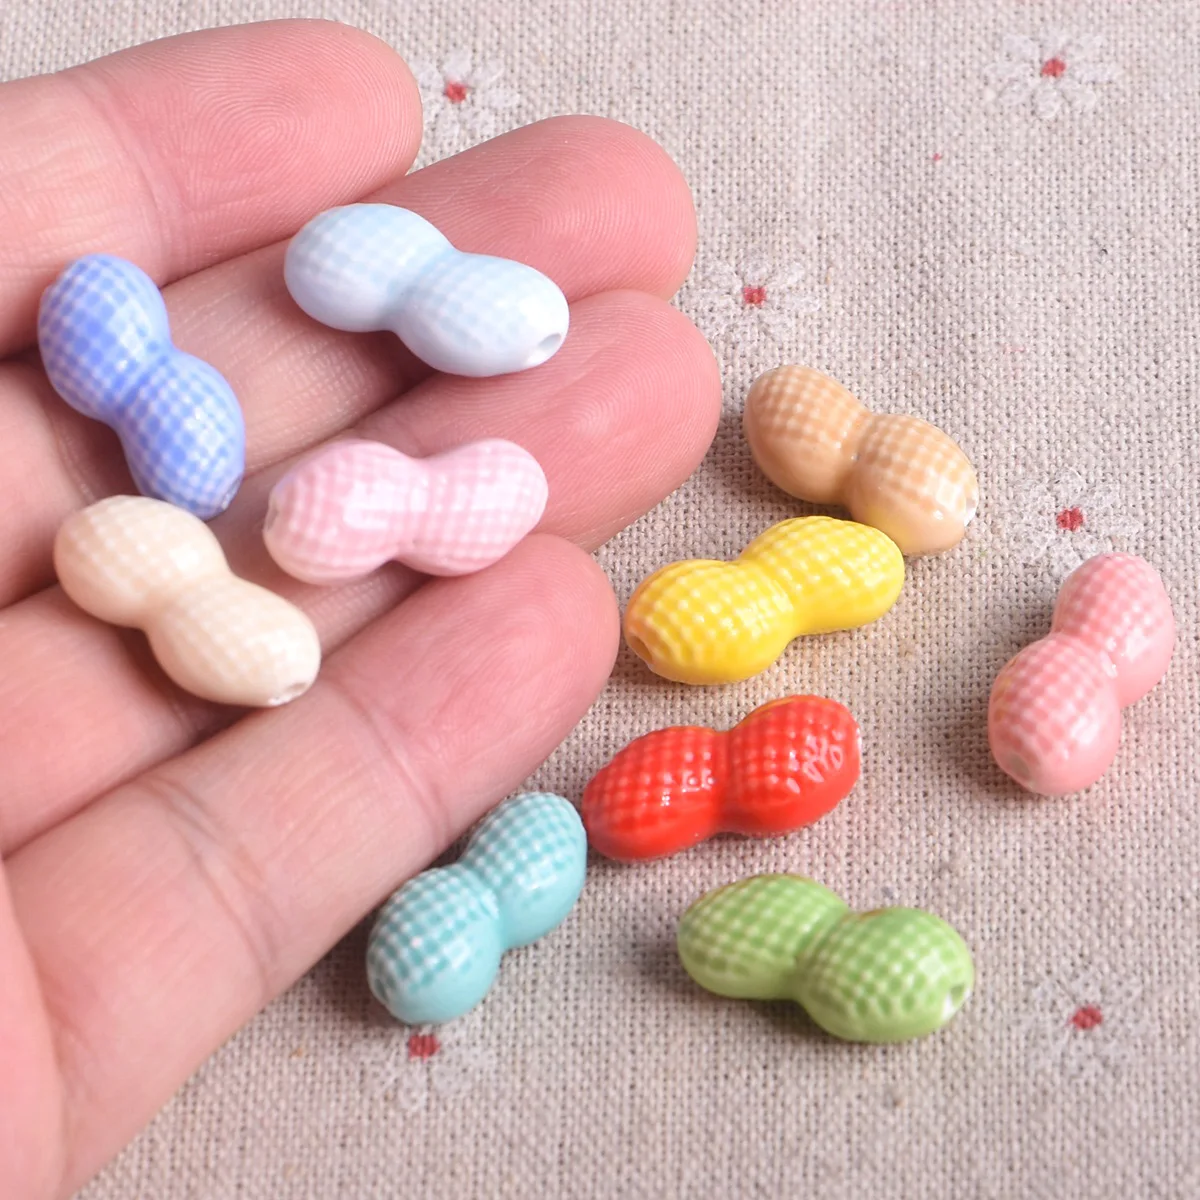 10pcs Peanut Shape 22x10mm Mixed Colors Ceramic Porcelain Loose Beads For Jewelry Makinng DIY Bracelet Findings 1 piece mixed ceramic ball fishing gear bearing 2os smr104c smr105c smr106c smr115c stainless steel 440c material